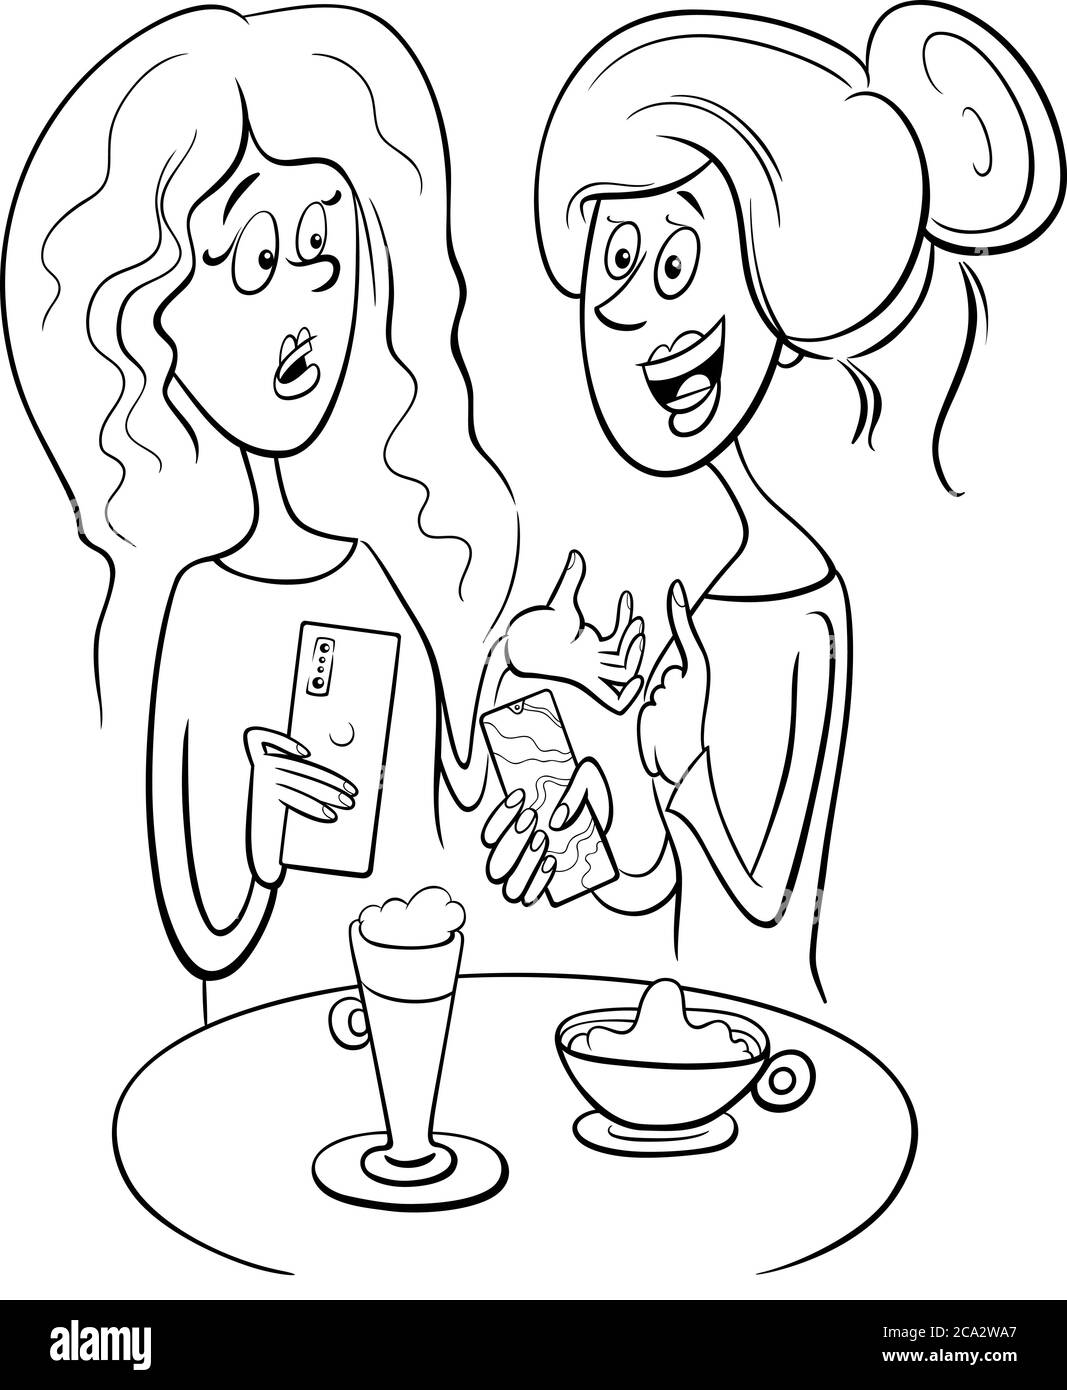 Black And White Cartoon Illustration Of Two Gossiping Women In A Cafe Coloring Book Page Stock Vector Image Art Alamy